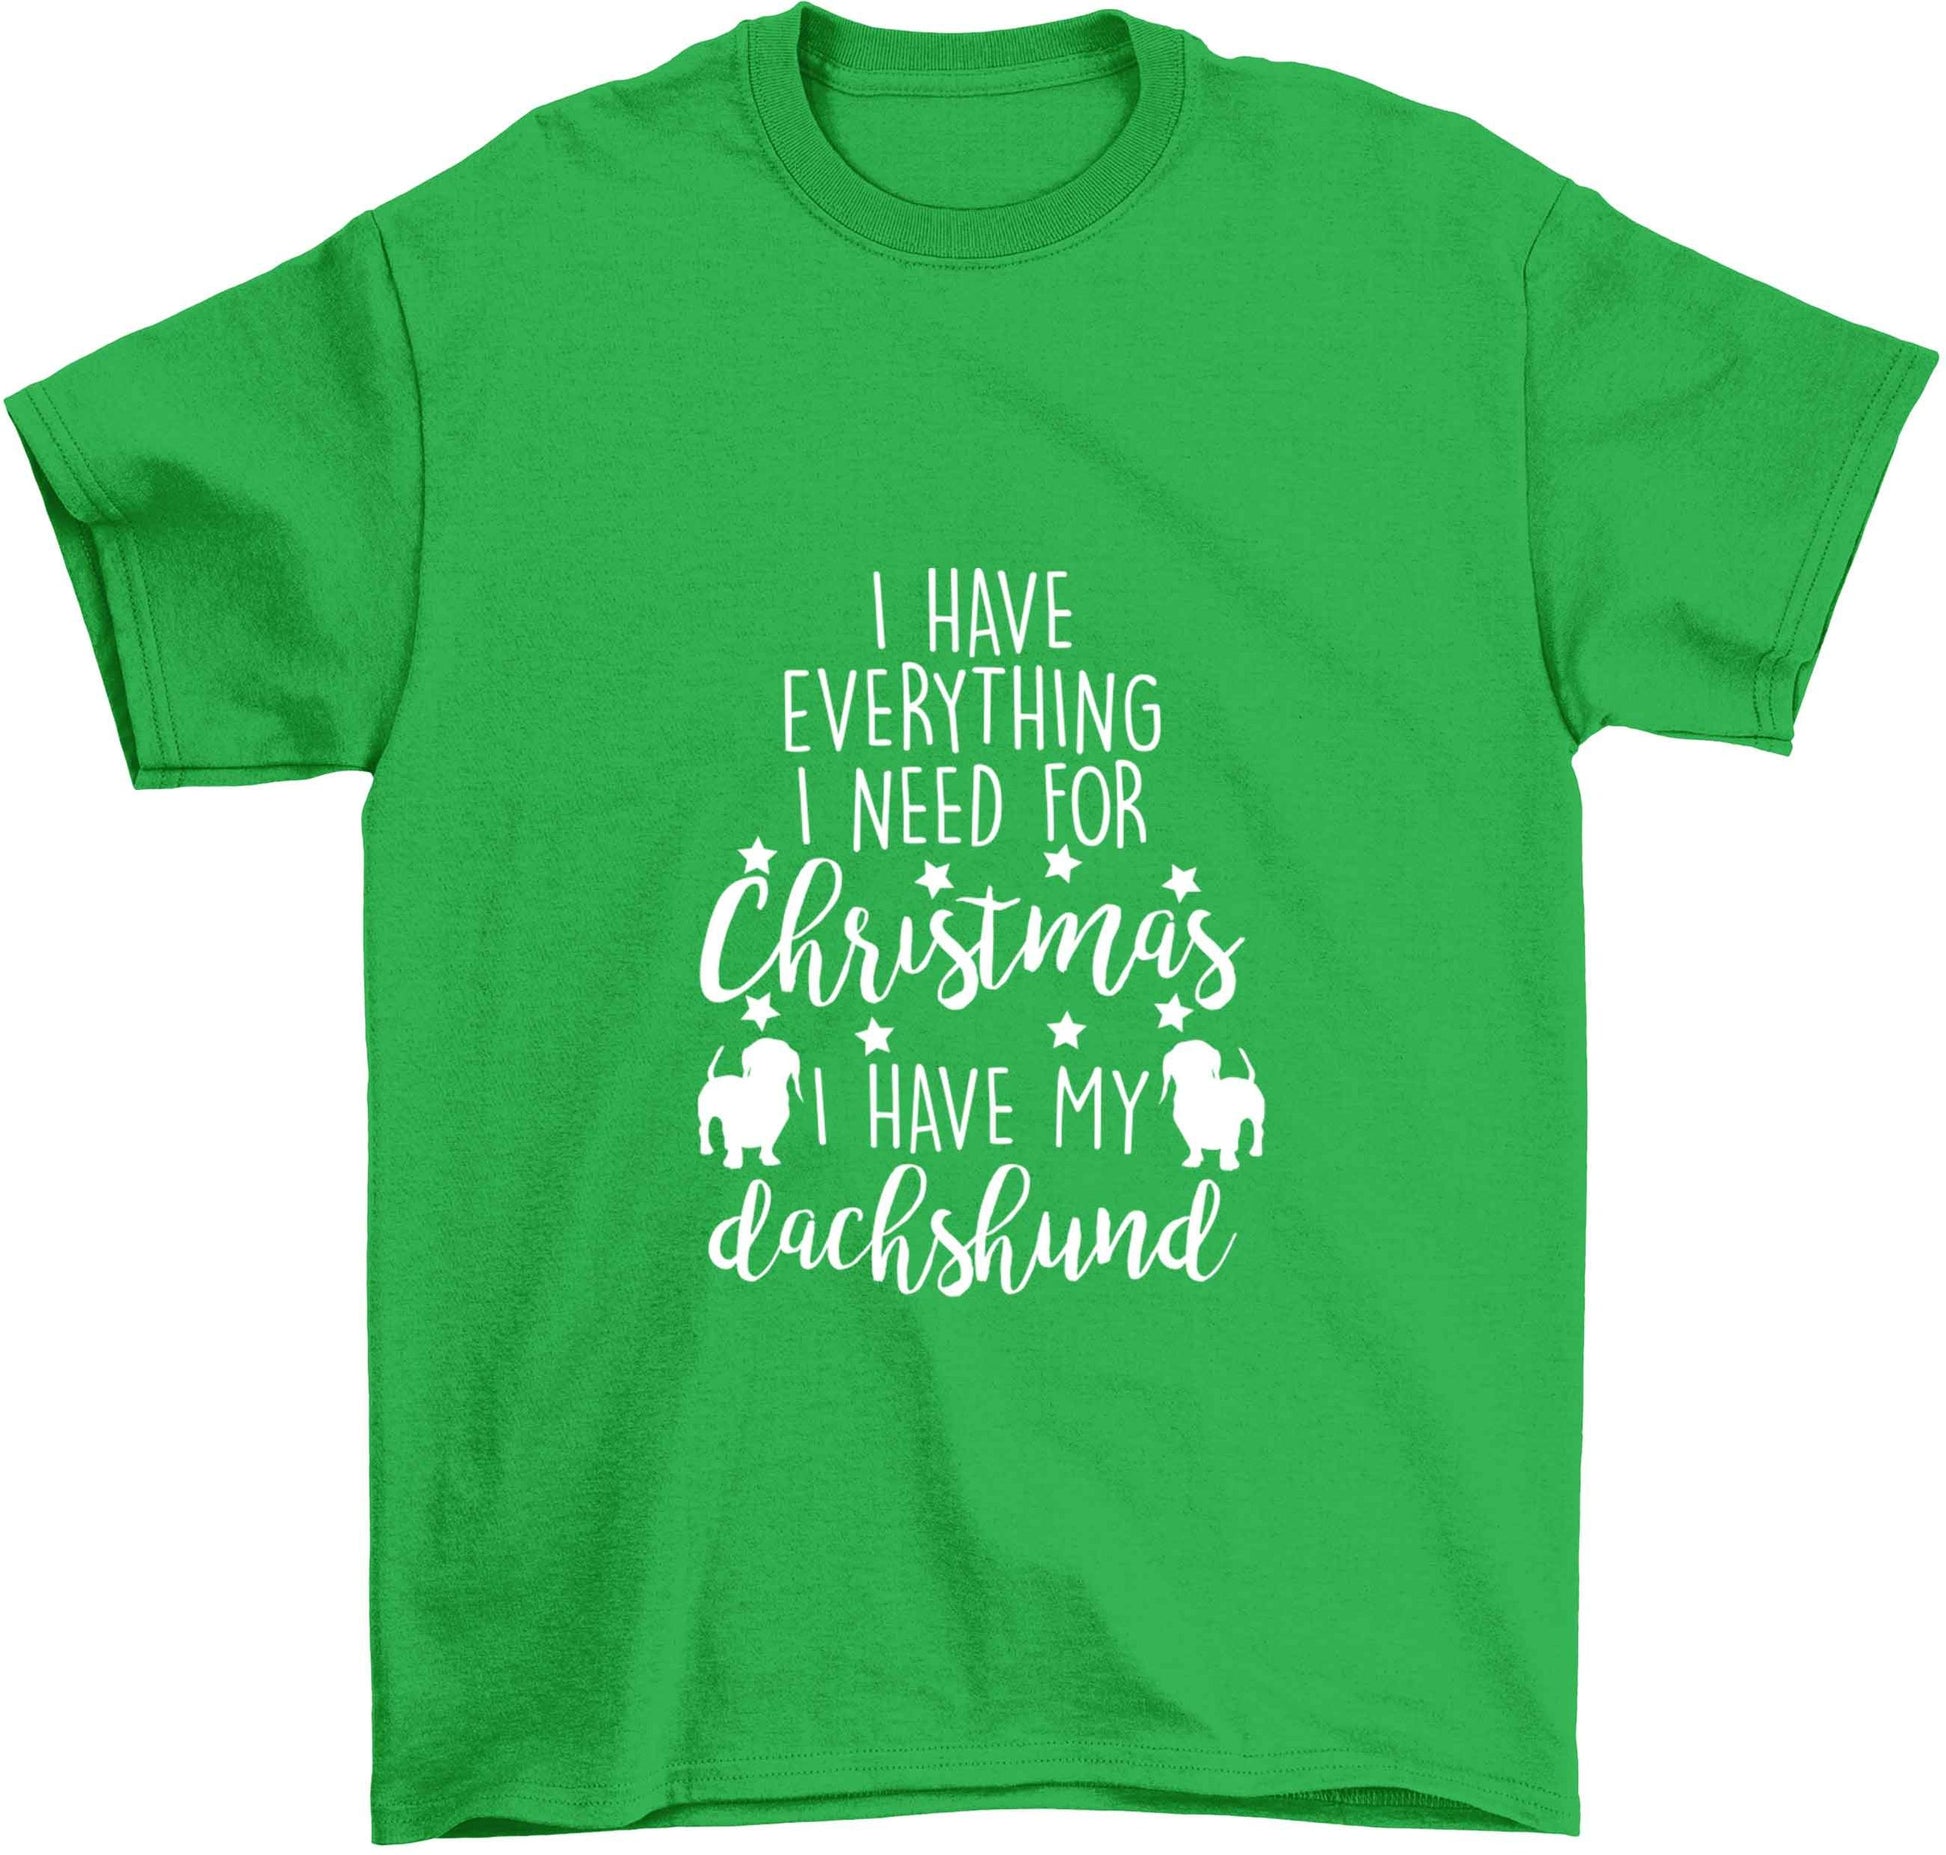 I have everything I need for Christmas I have my dachshund Children's green Tshirt 12-13 Years